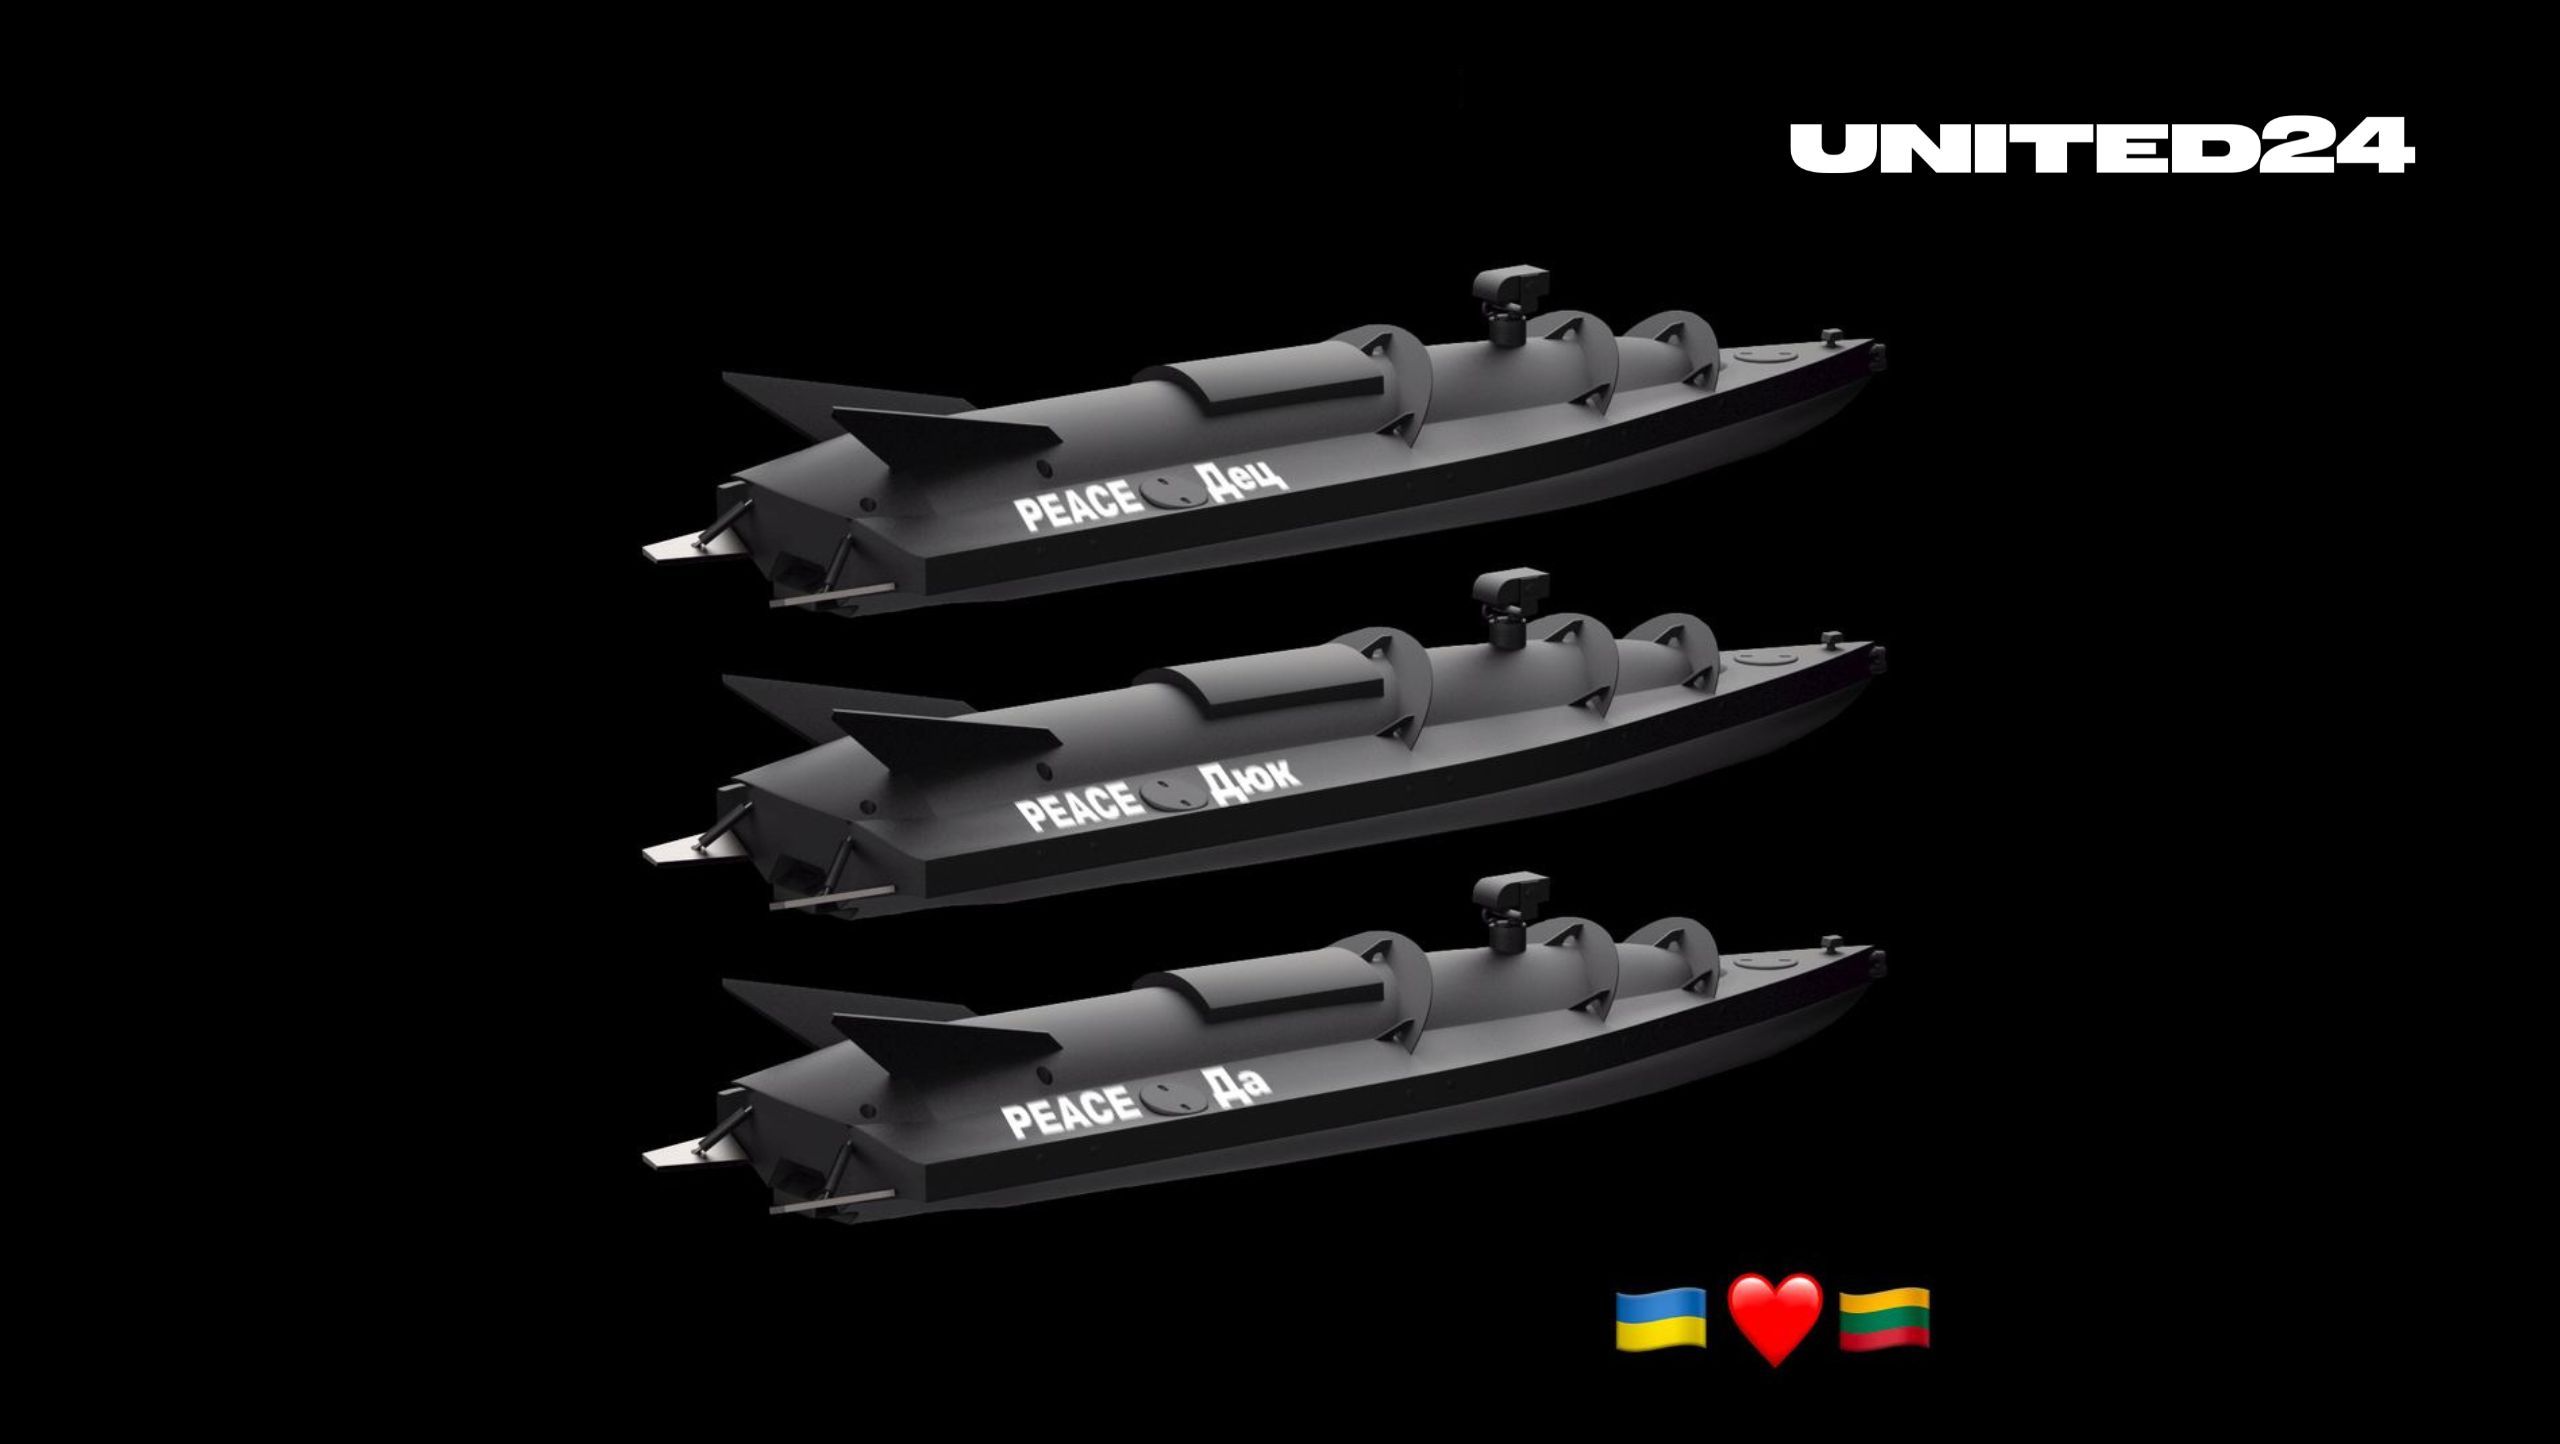 Lithuanian People have Already Raised Money for Three Naval Drones